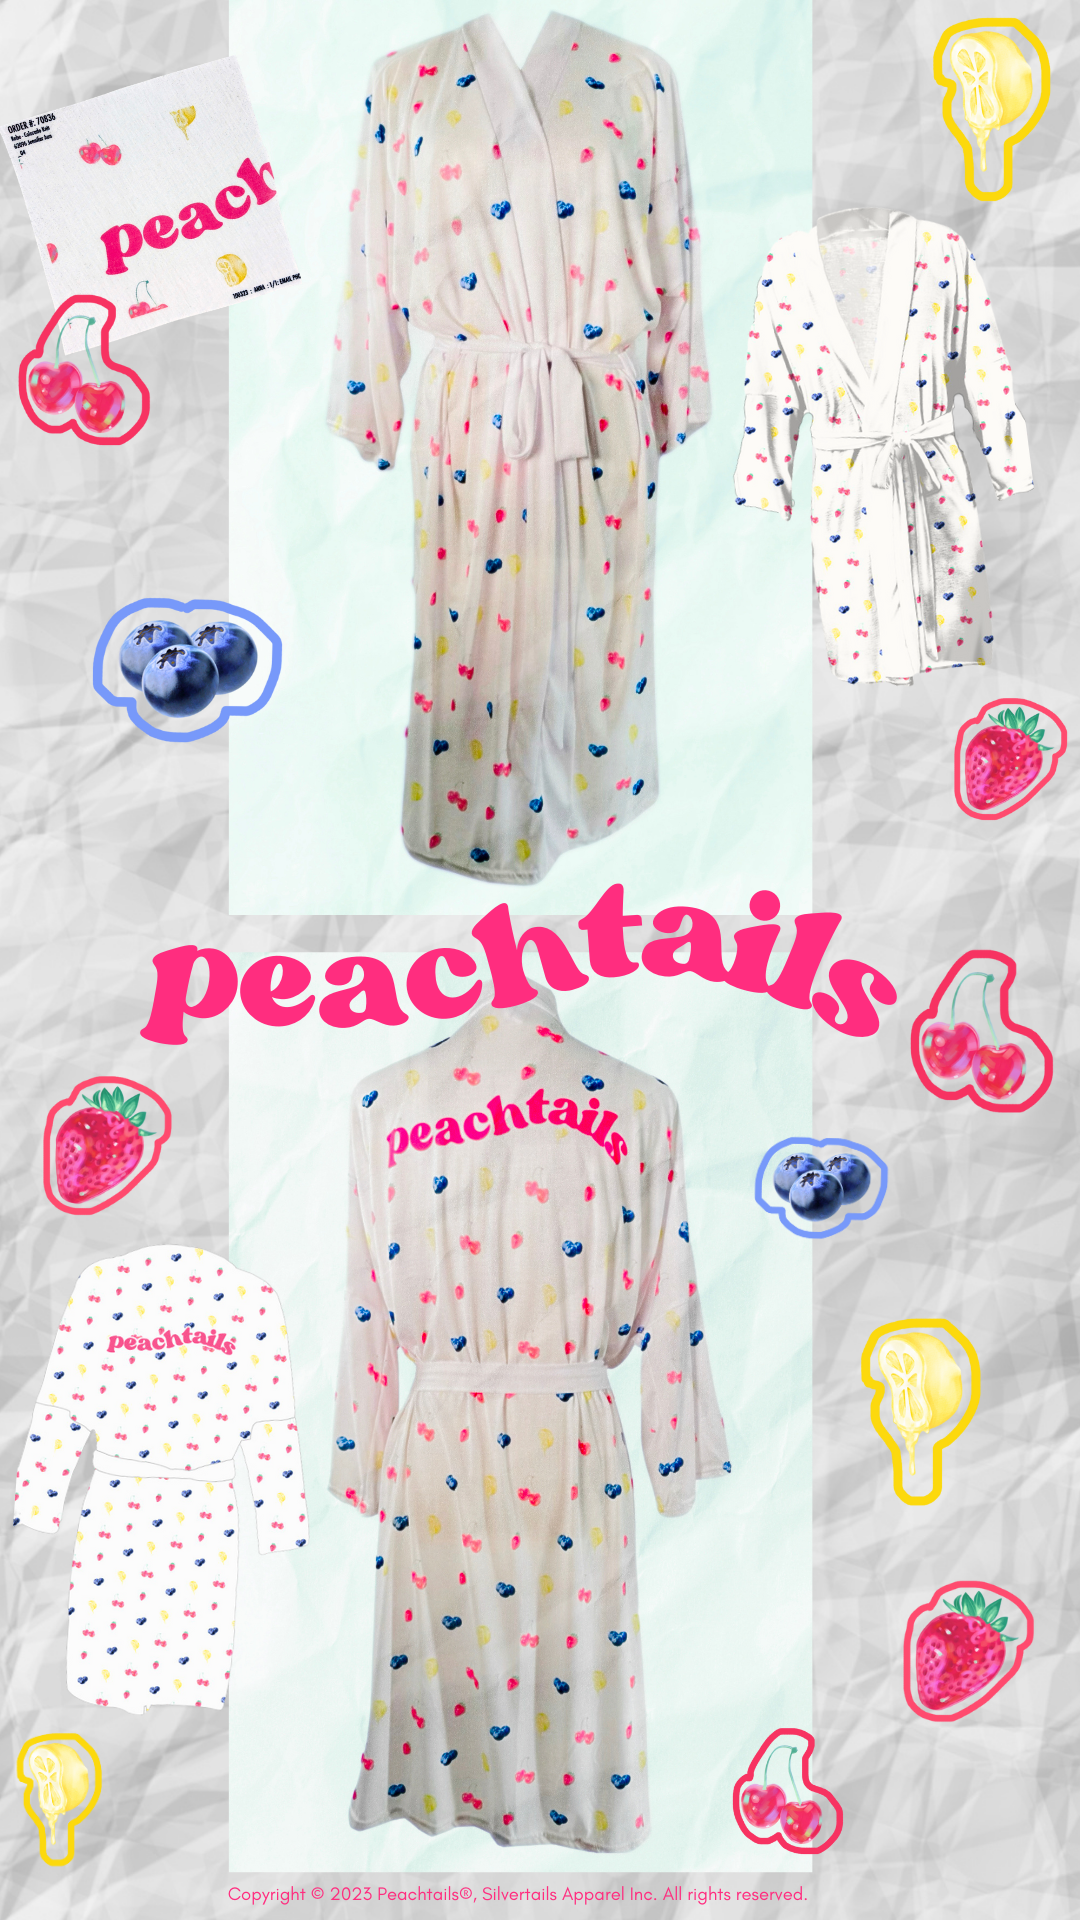 The image displays a collection of bathrobes with the 'peachtails' logo, set against a crinkled pastel background with fruit and ice pop illustrations. The main robe is front and center with two smaller images of the same robe on either side. Each robe features a playful pattern of colorful fruits. The word "peachtails" is prominently displayed in a large, pink script in the middle of the image. The design is whimsical and lively, suggestive of a fun and comfortable clothing line.